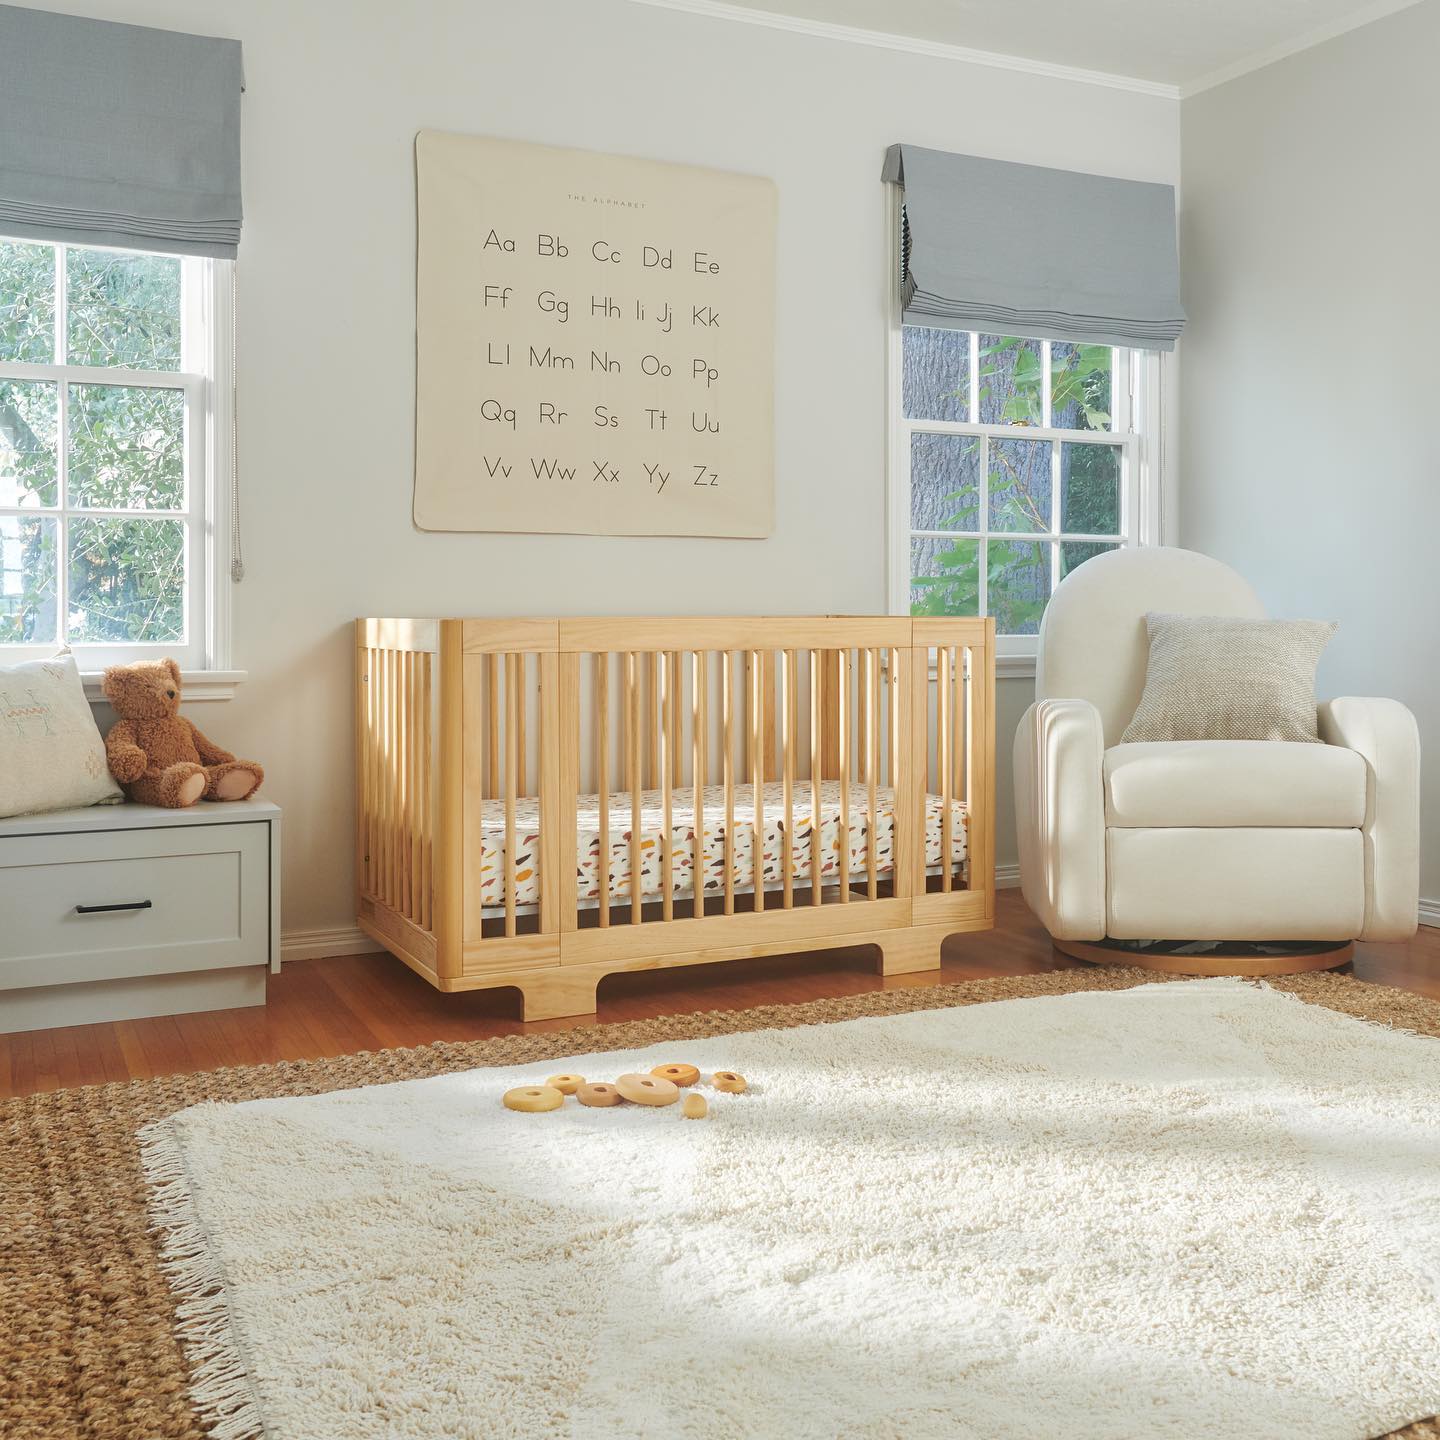 Nursery with wooden convertible crib, large rug, and alphabet wall hanging. Photo by Instagram user @babyletto